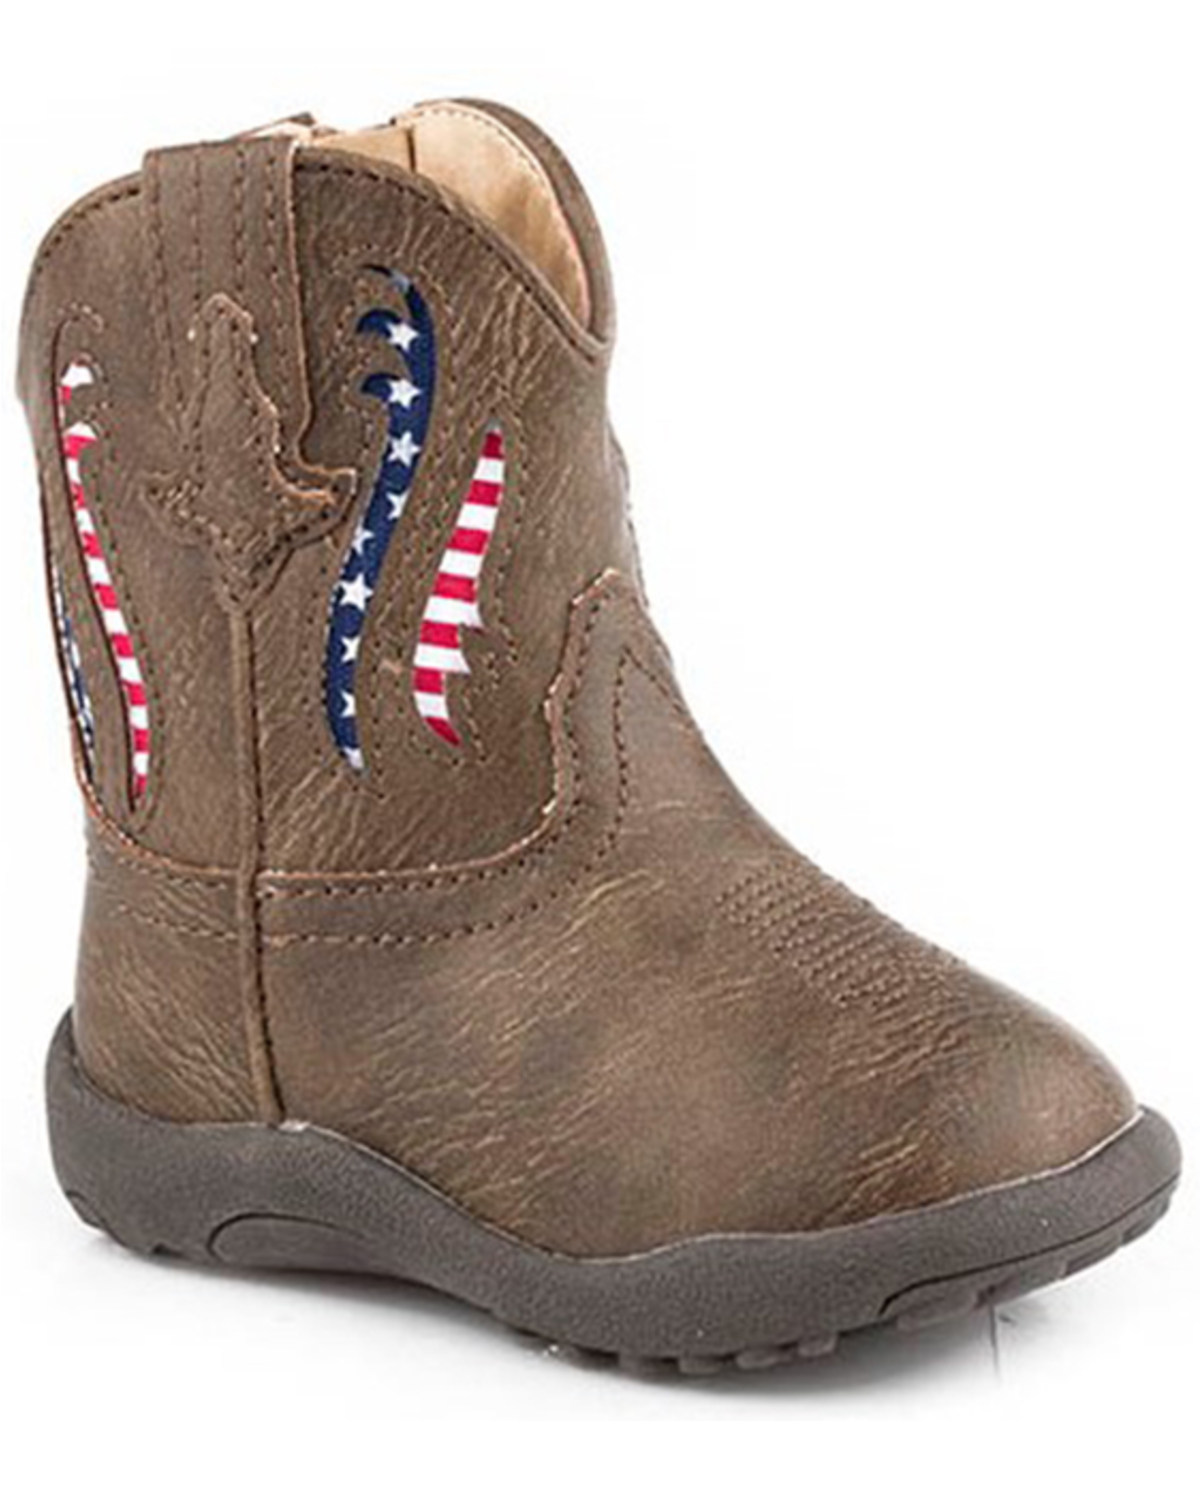 Roper Infant Boys' Liberty Western Boots - Round Toe